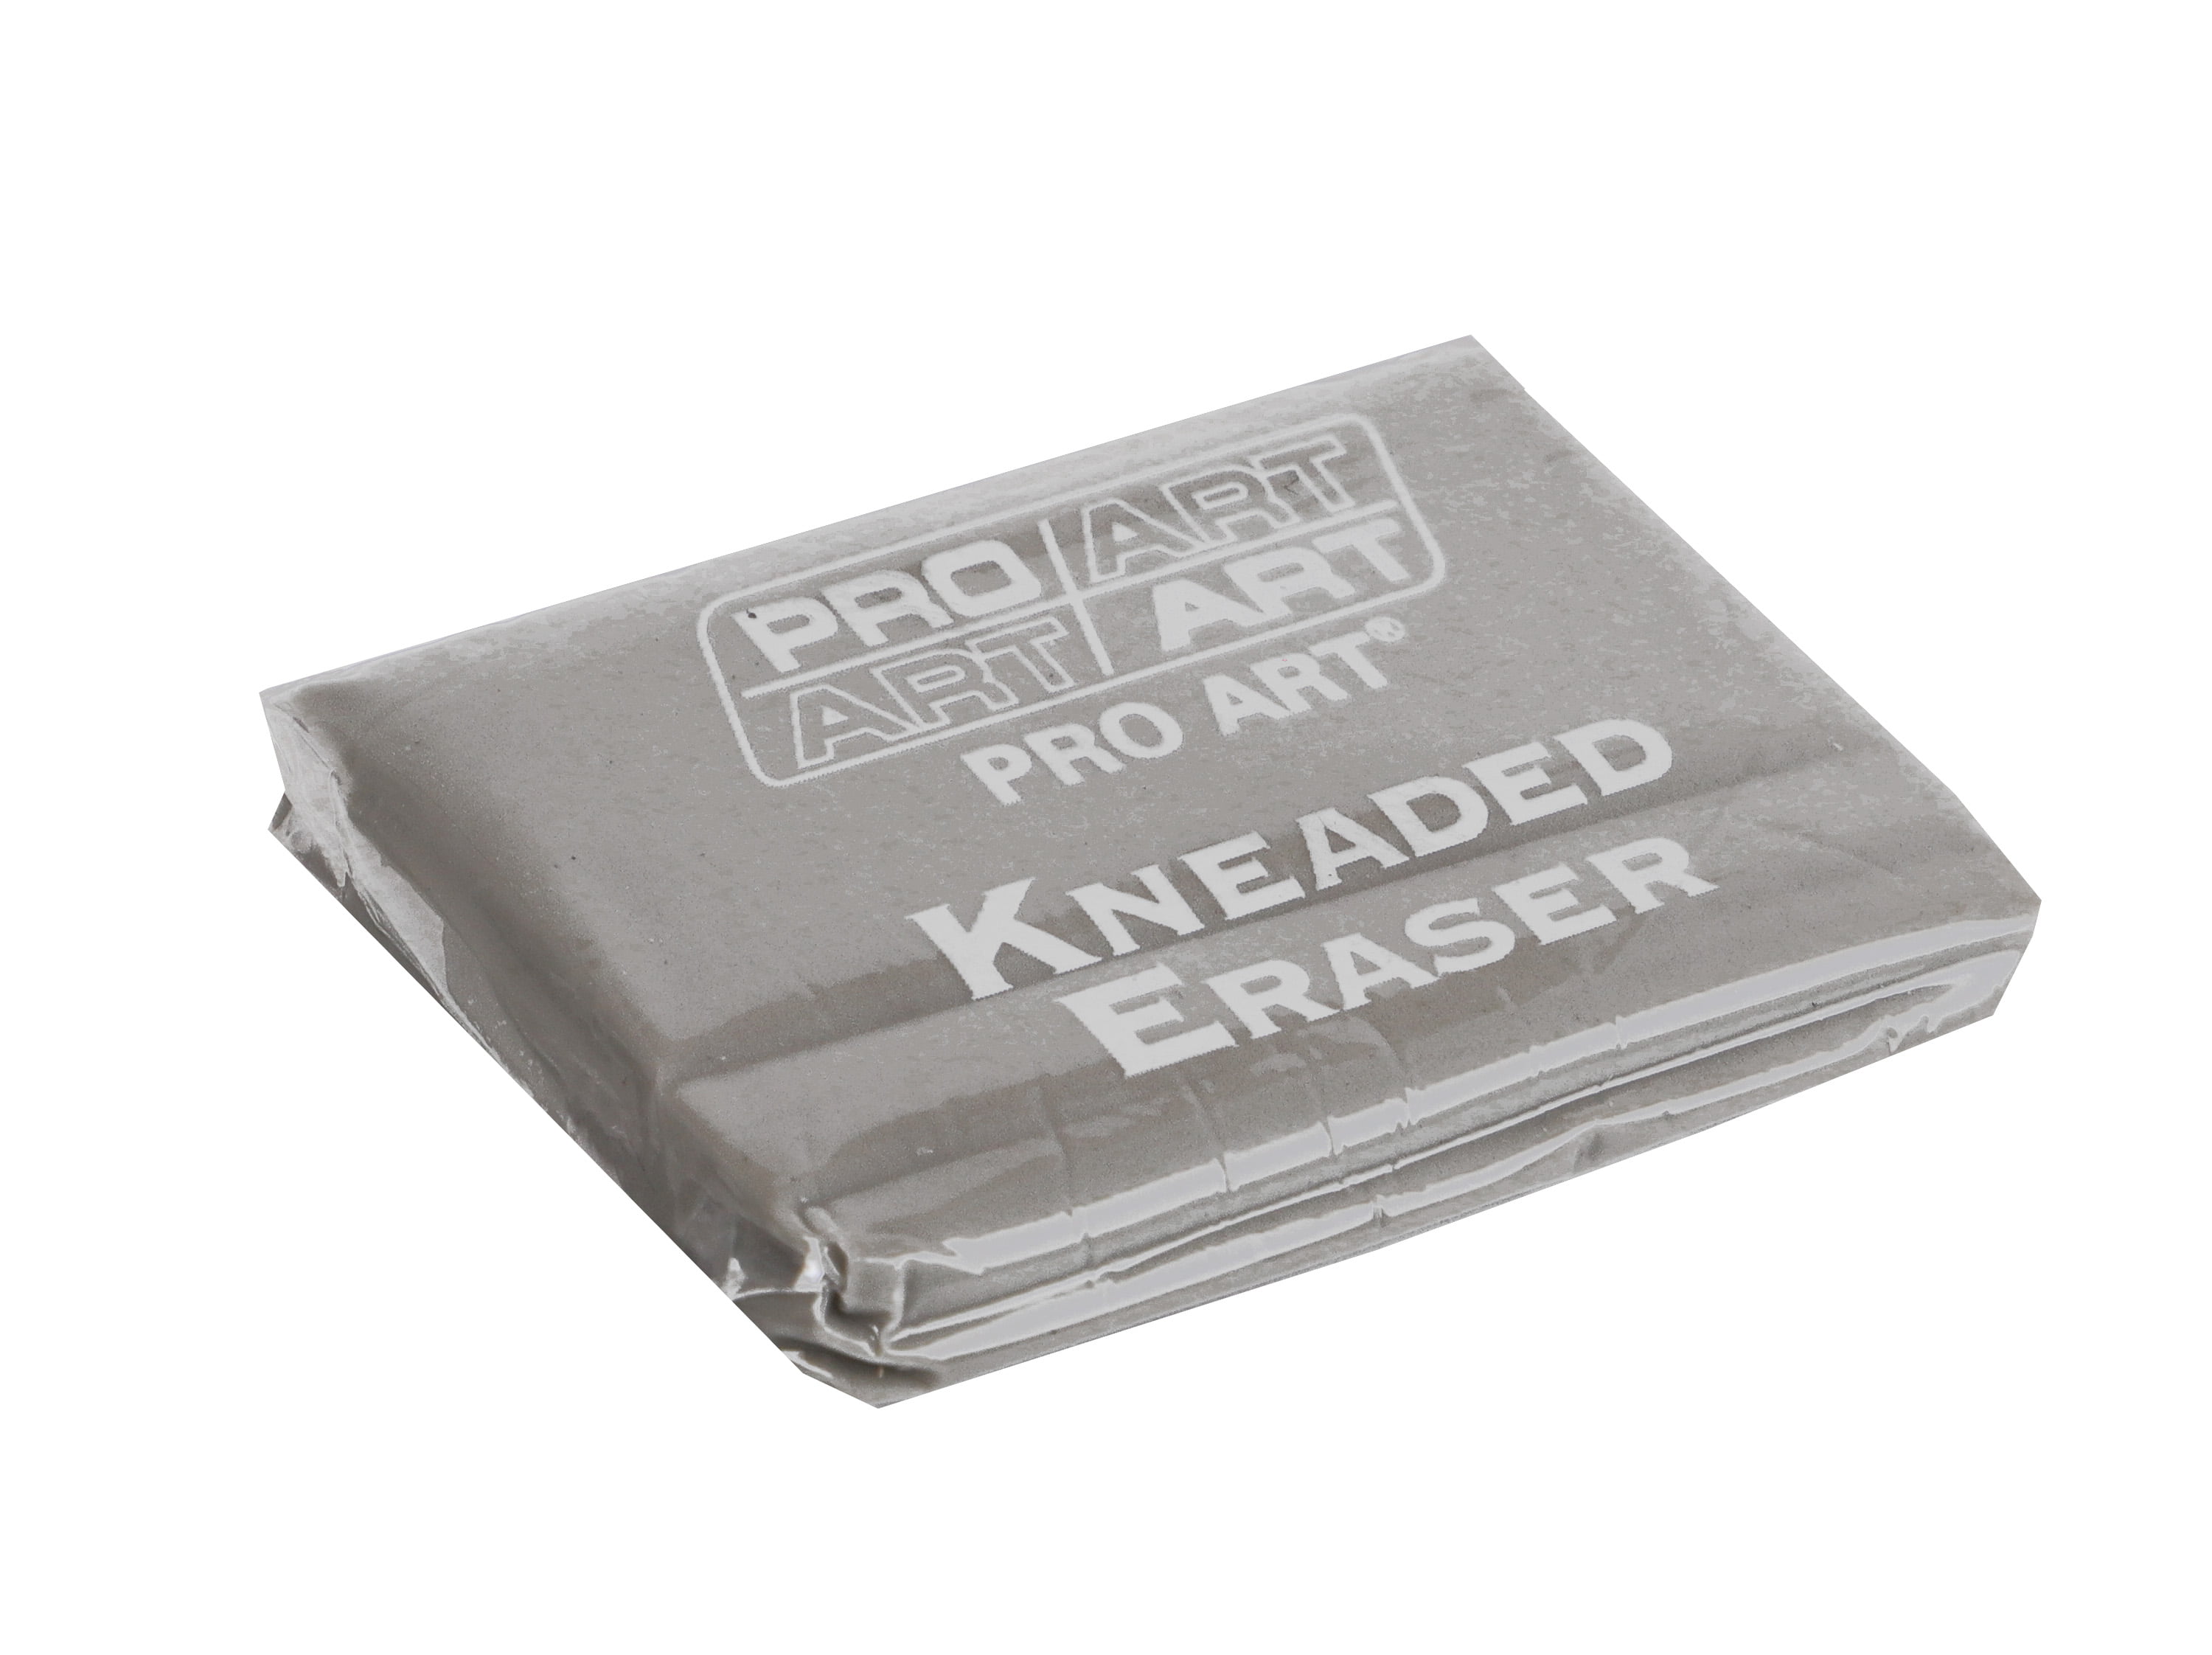 Best Kneaded Erasers of 2023 for Precision and Clean Artwork Corrections –  January 2024